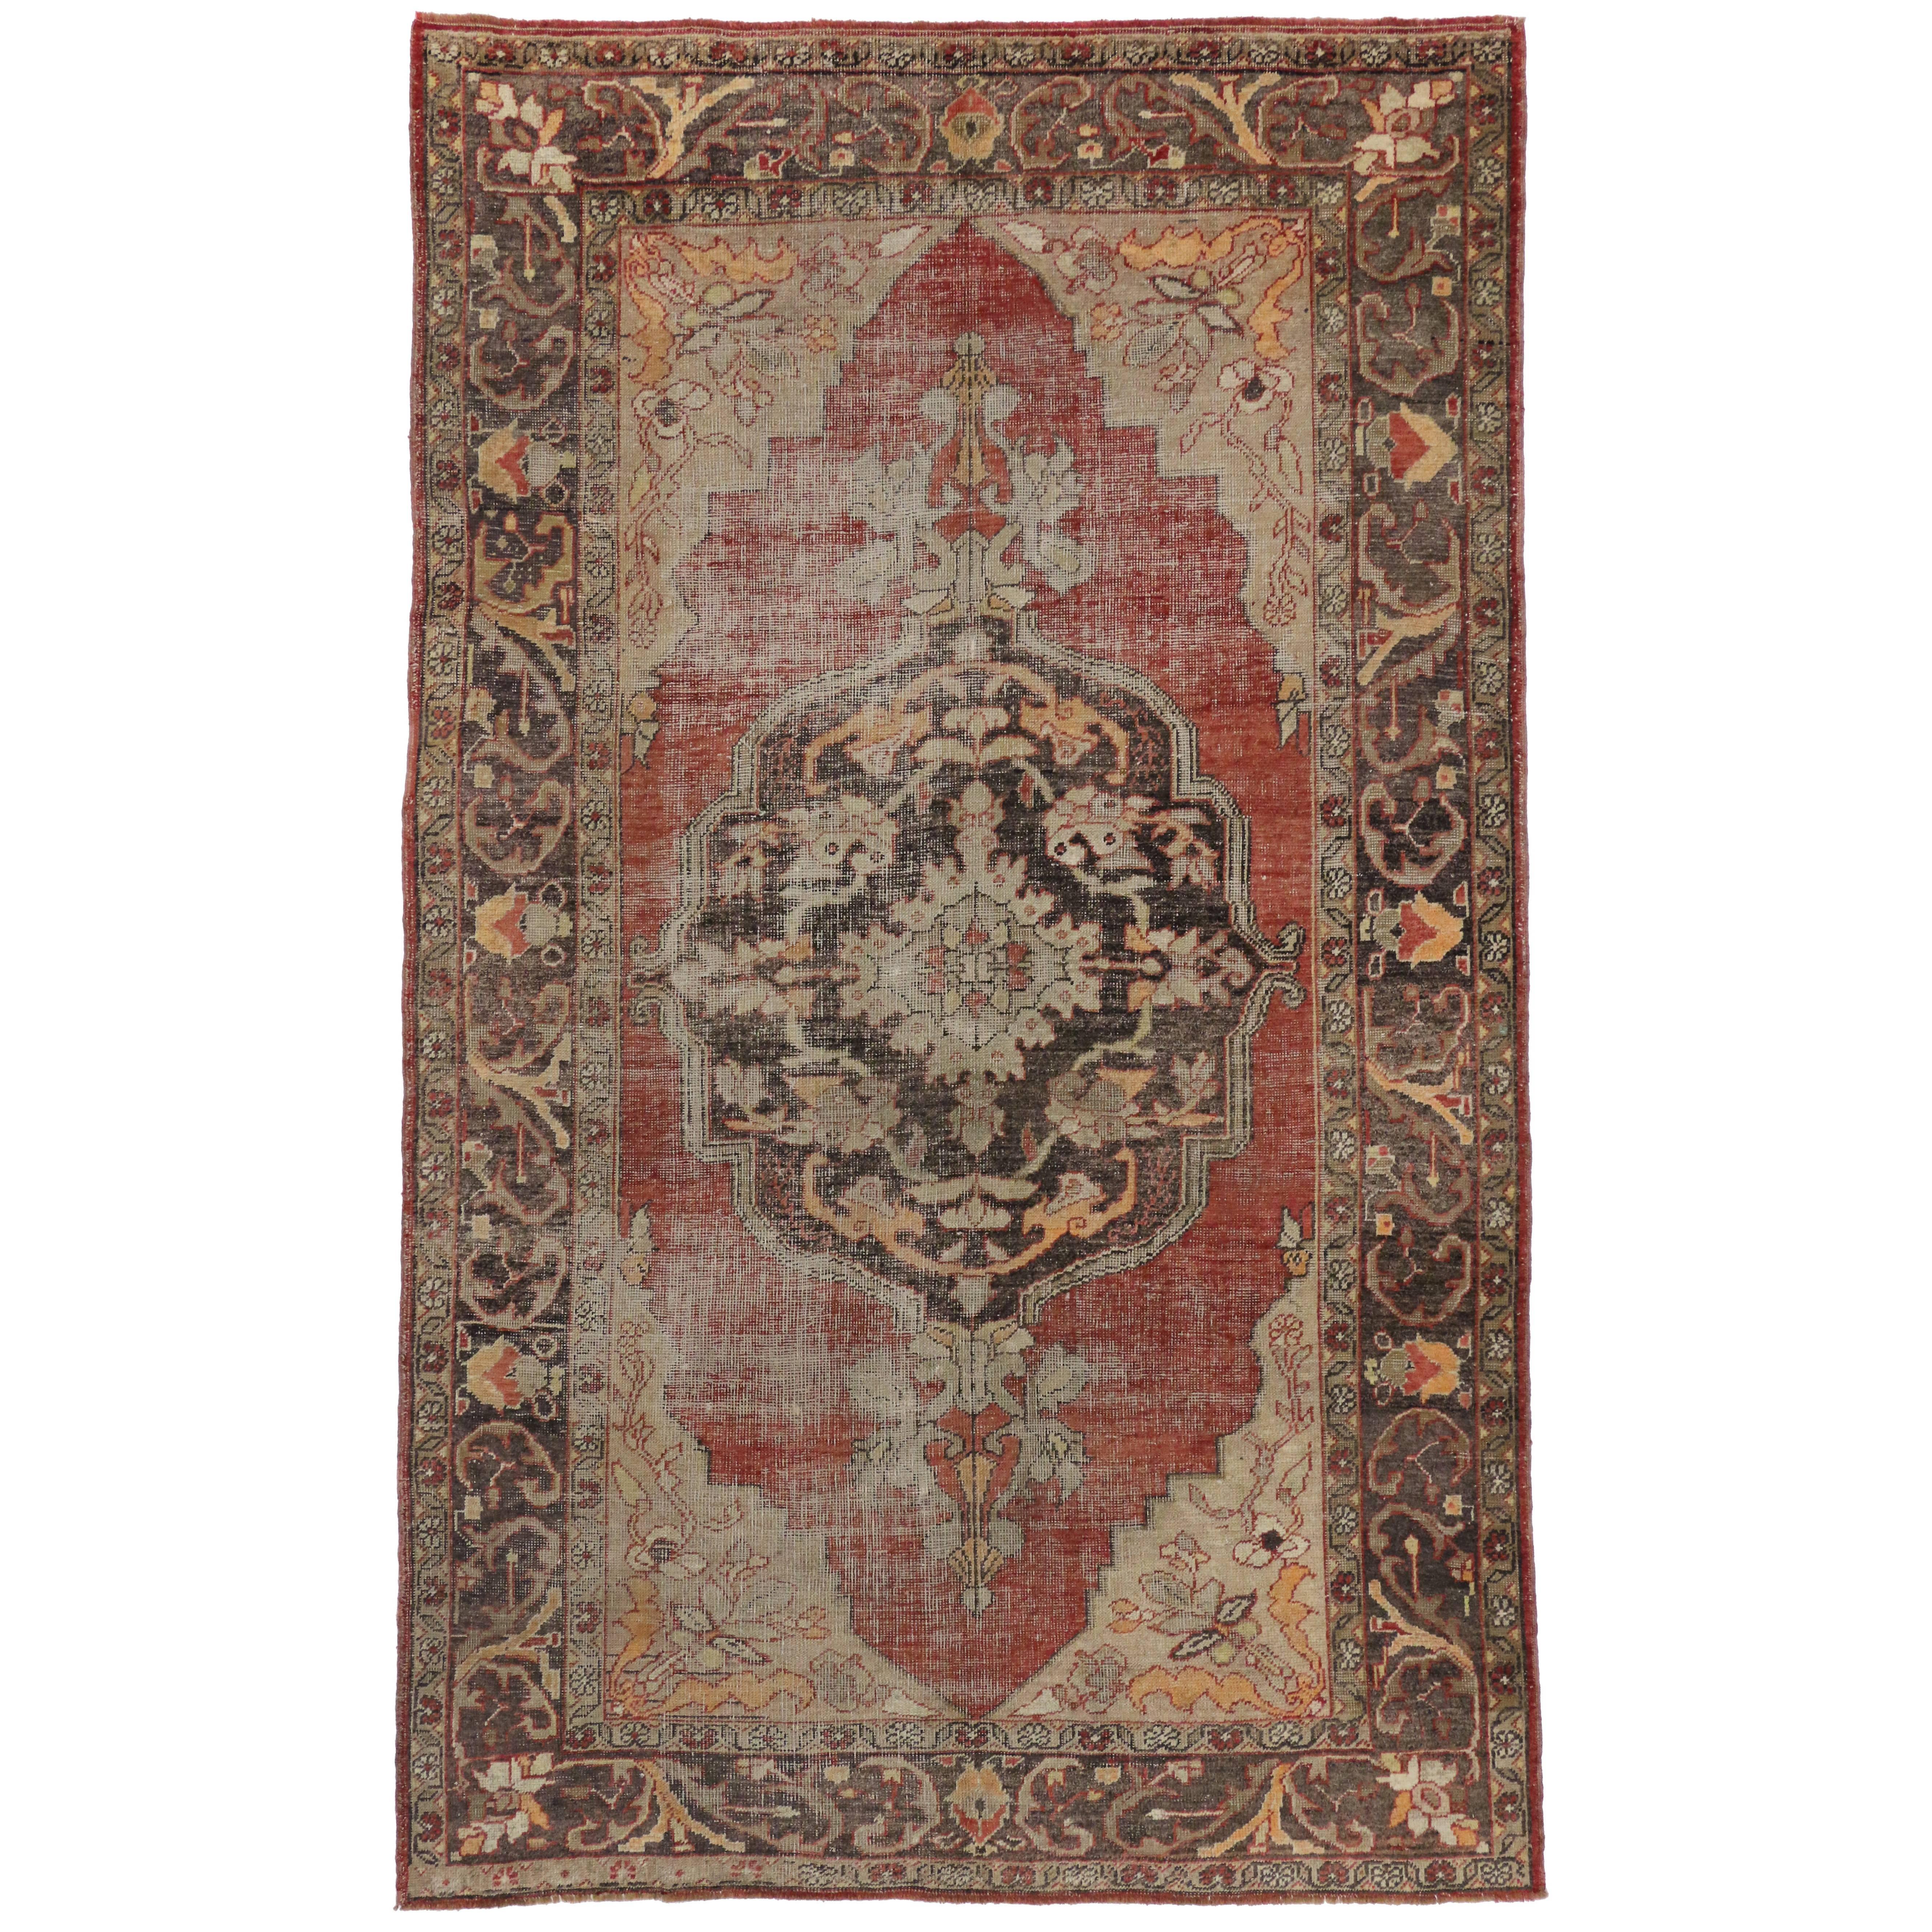 Distressed Vintage Turkish Oushak Rug with Rustic English Manor Style 